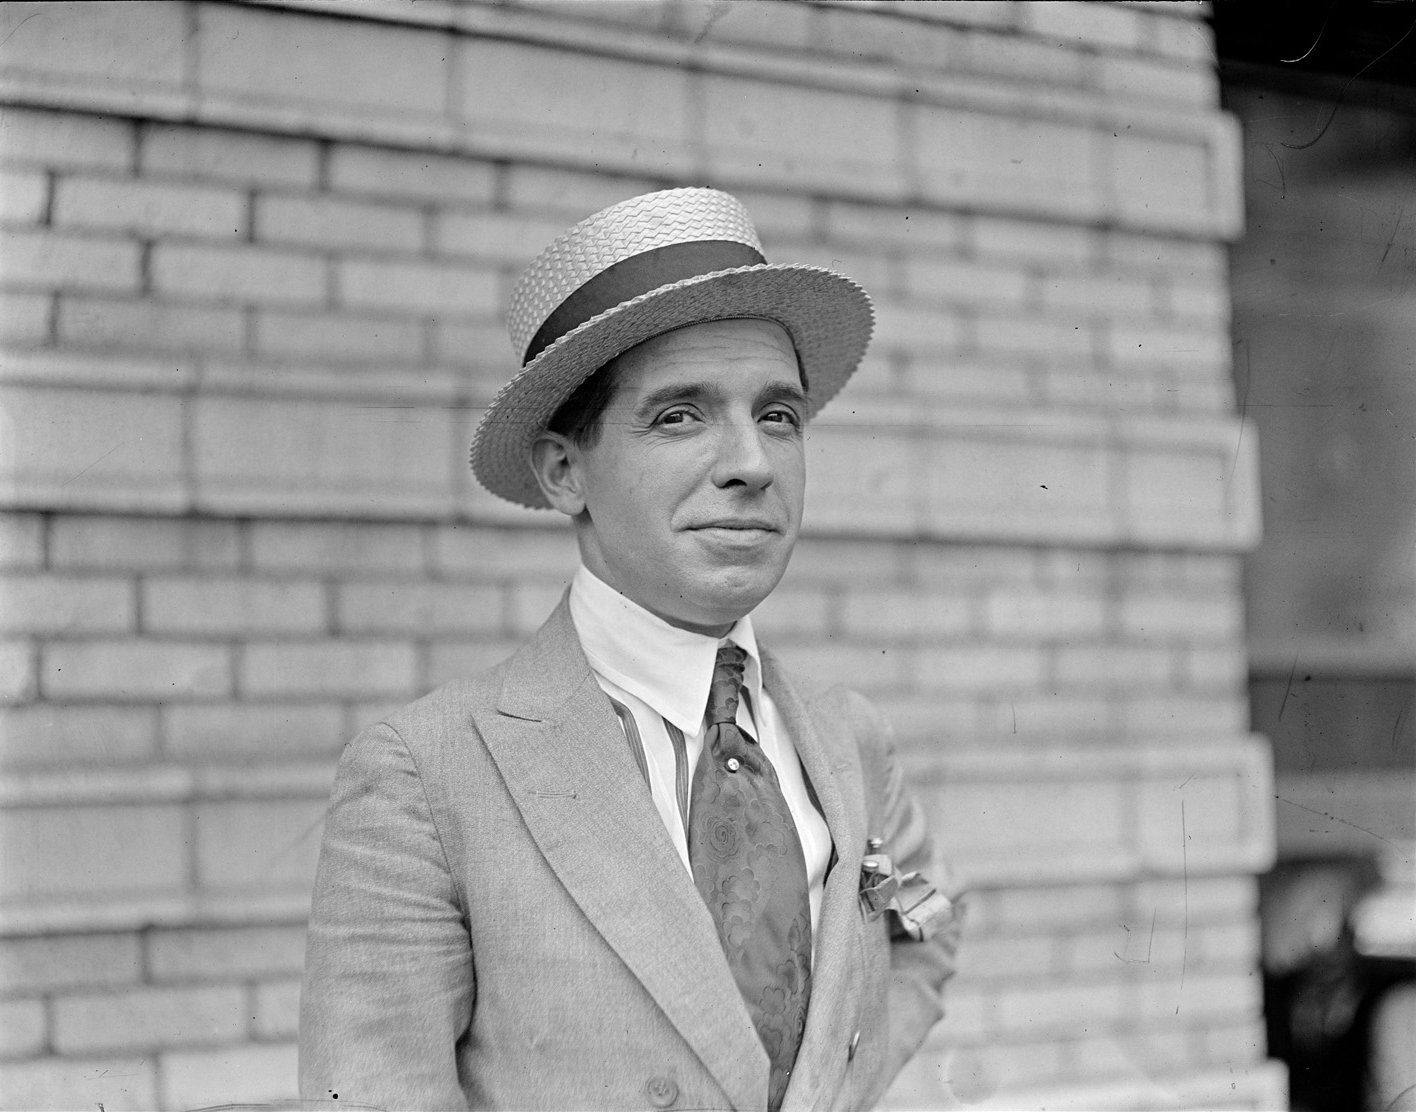 a person in a suit and hat